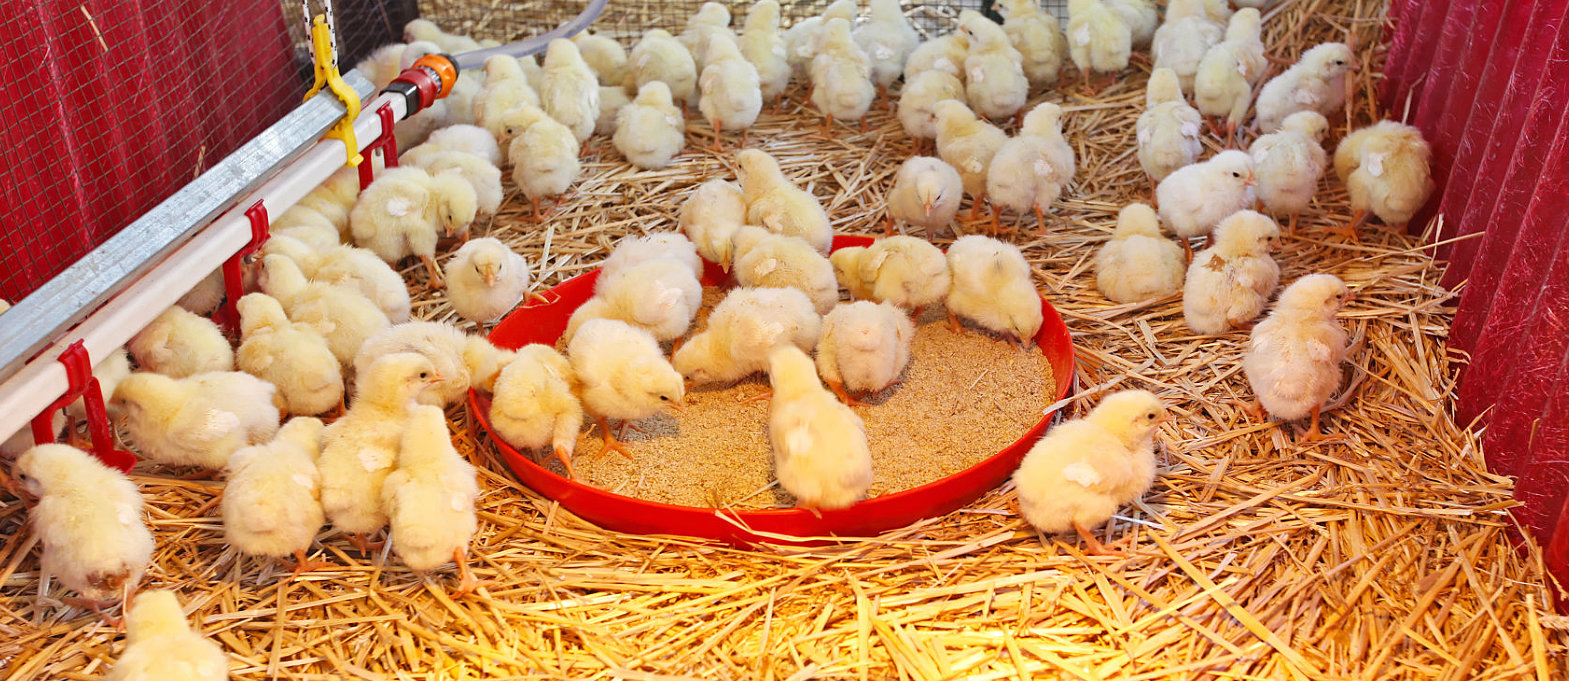 chicks poultry concept